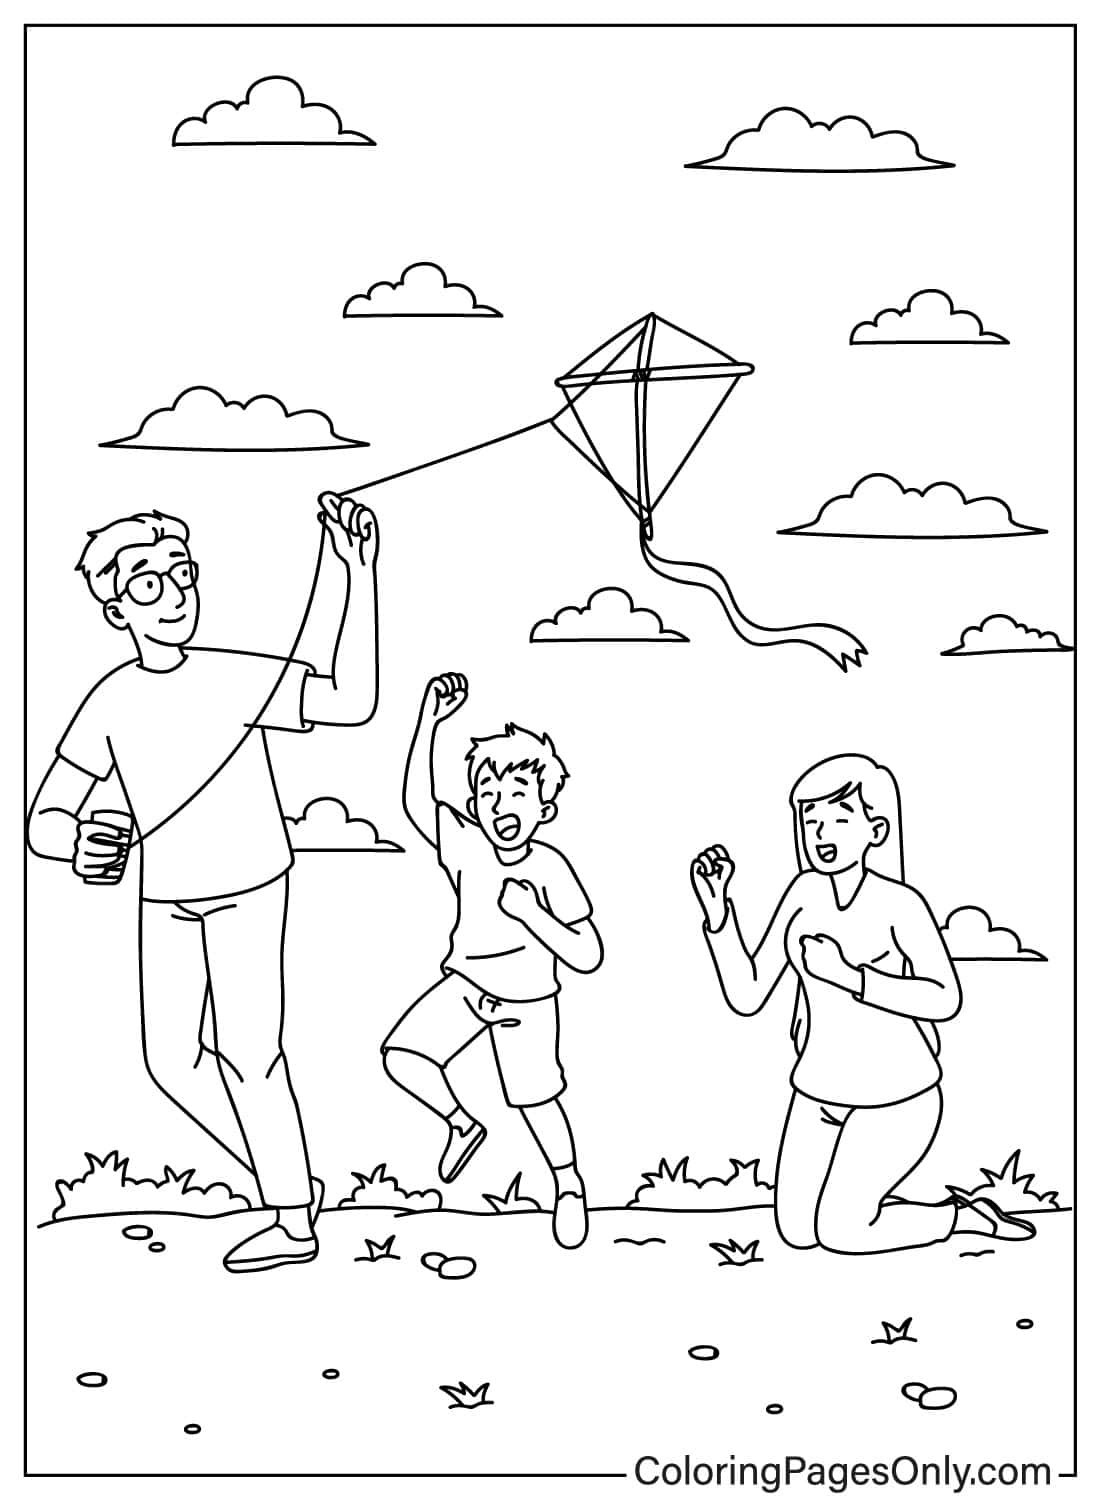 Family Flying Kites Together from Kite